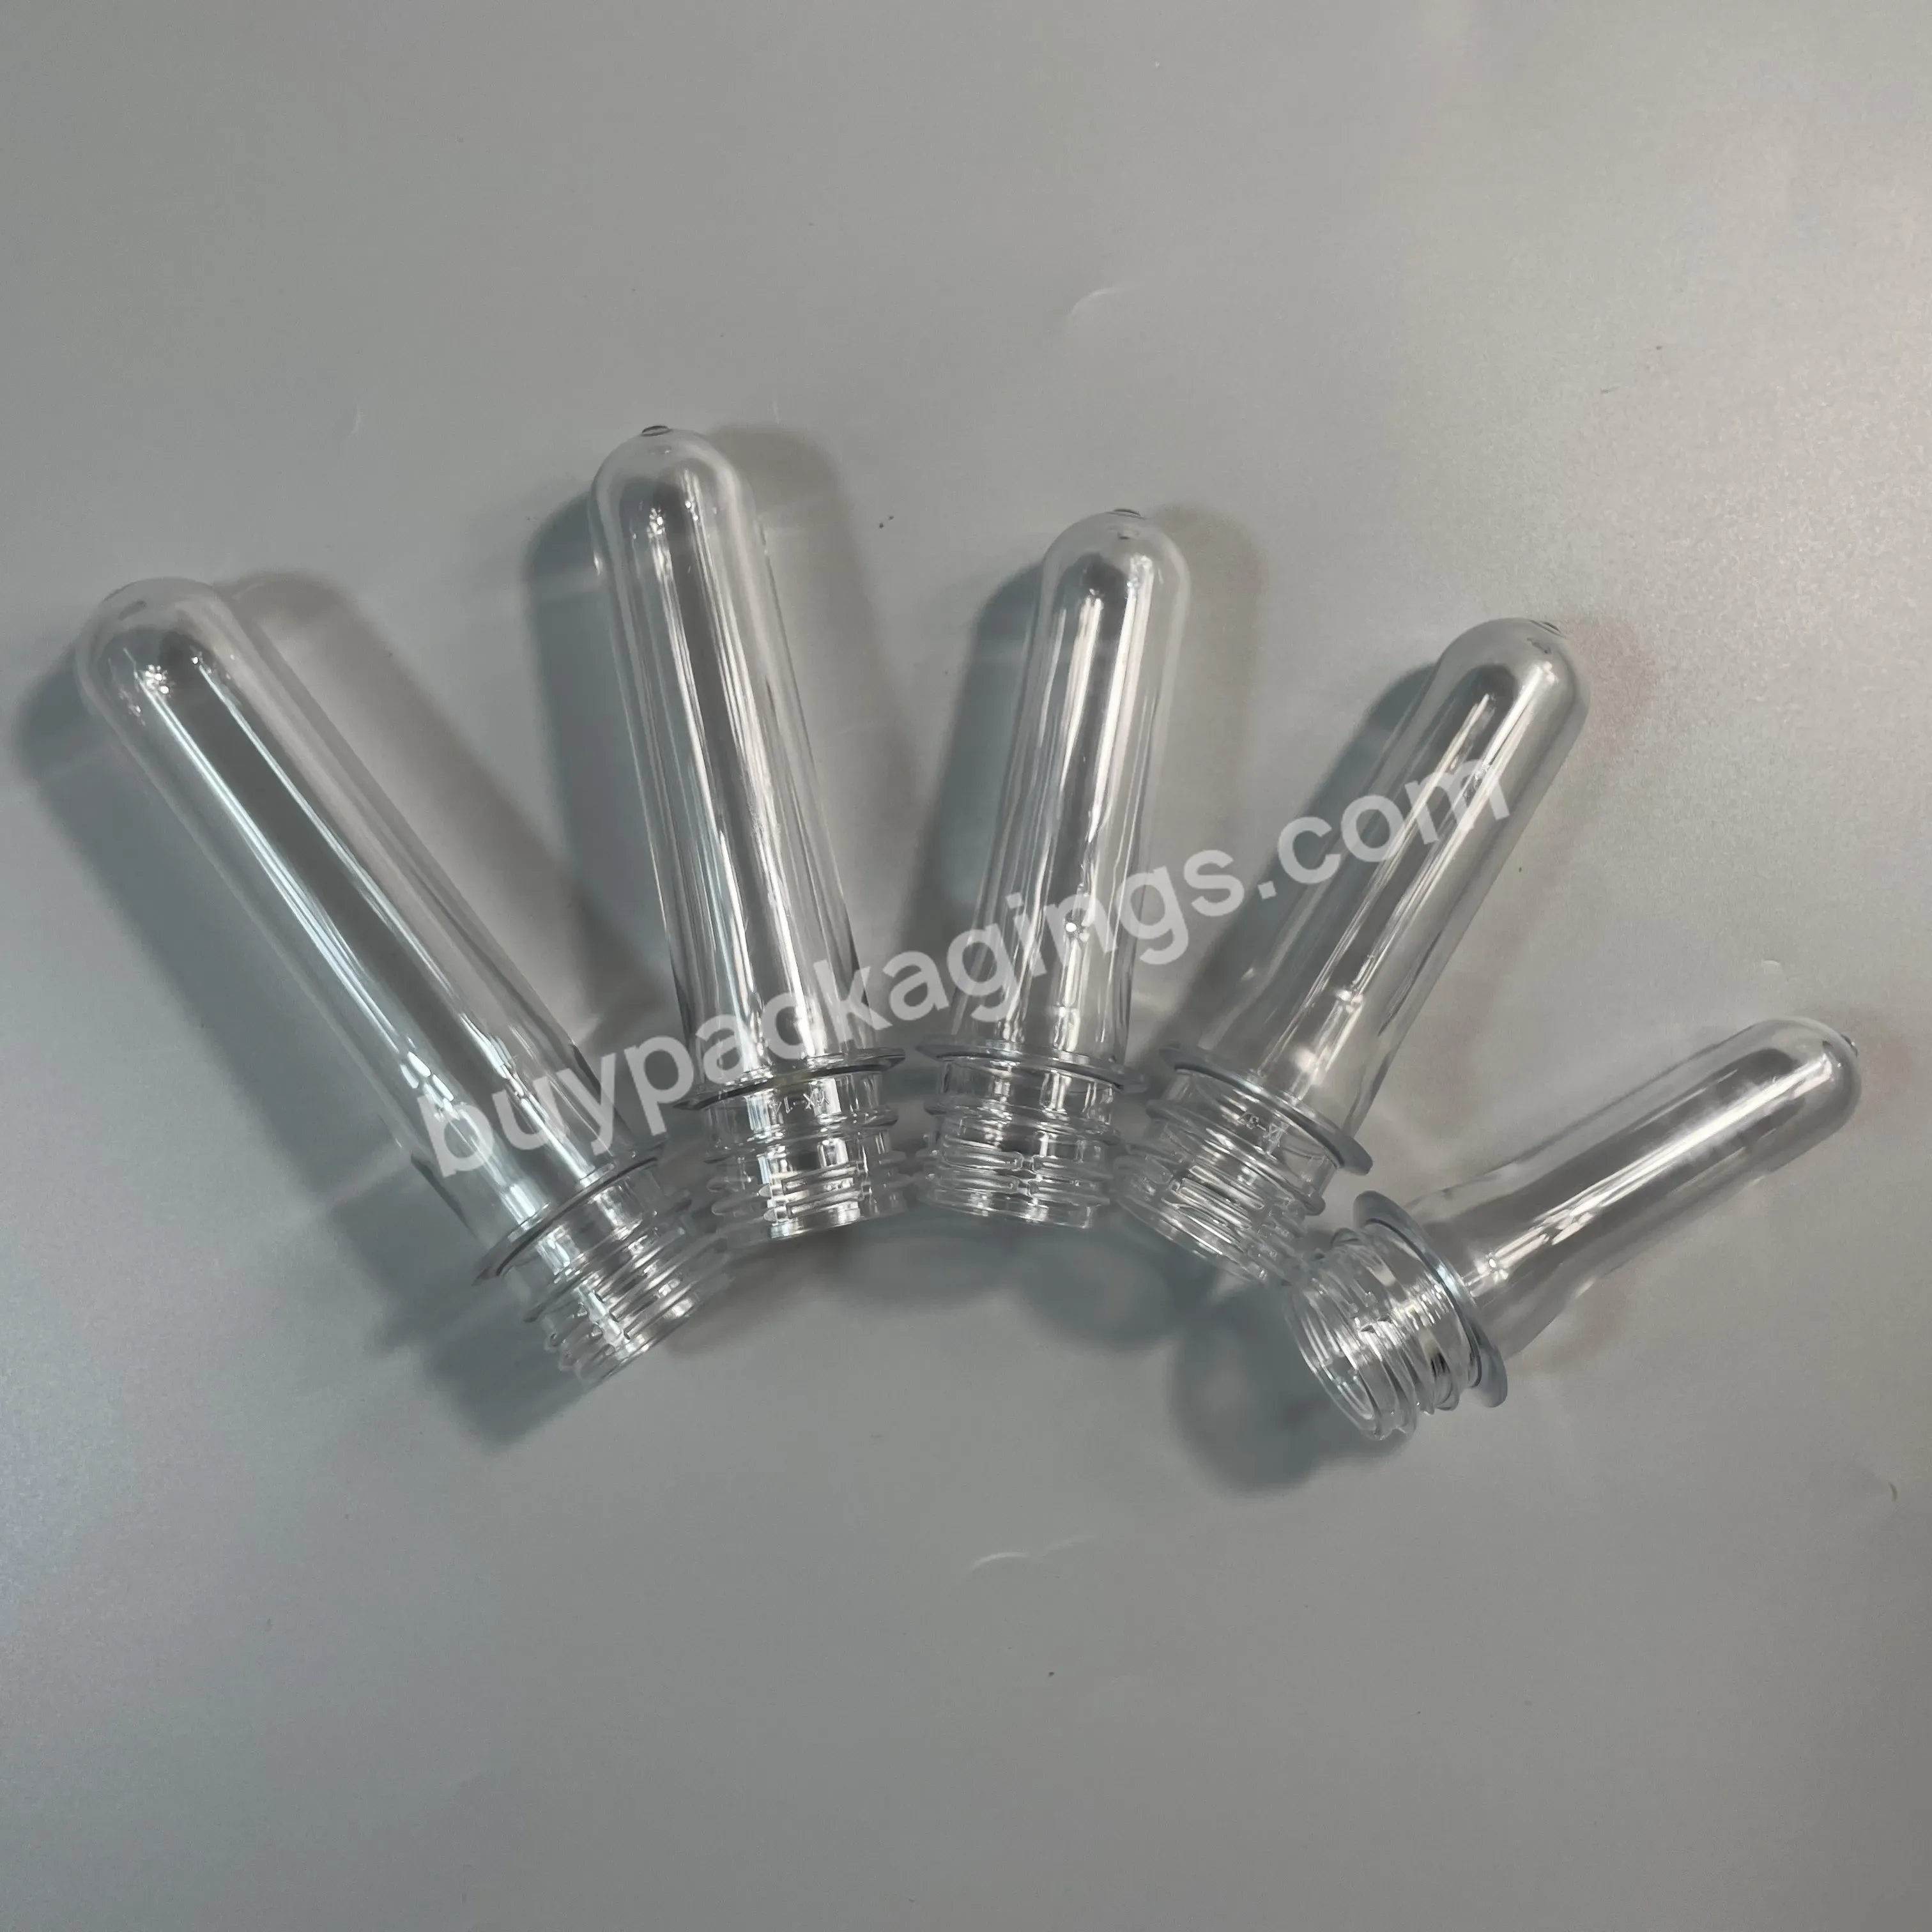 Professional Chinese Pco1880 Pet Pco Neck 14g 20g 22g 25g 28g 36g 38g Pet Preform For Water Bottle - Buy 28mm Pet Preform For Bottle With 100% New Material,Pet Bottle Preform Tube Multi-specification And Multi-gram Weight In Stock,Pet Water Bottle Pr